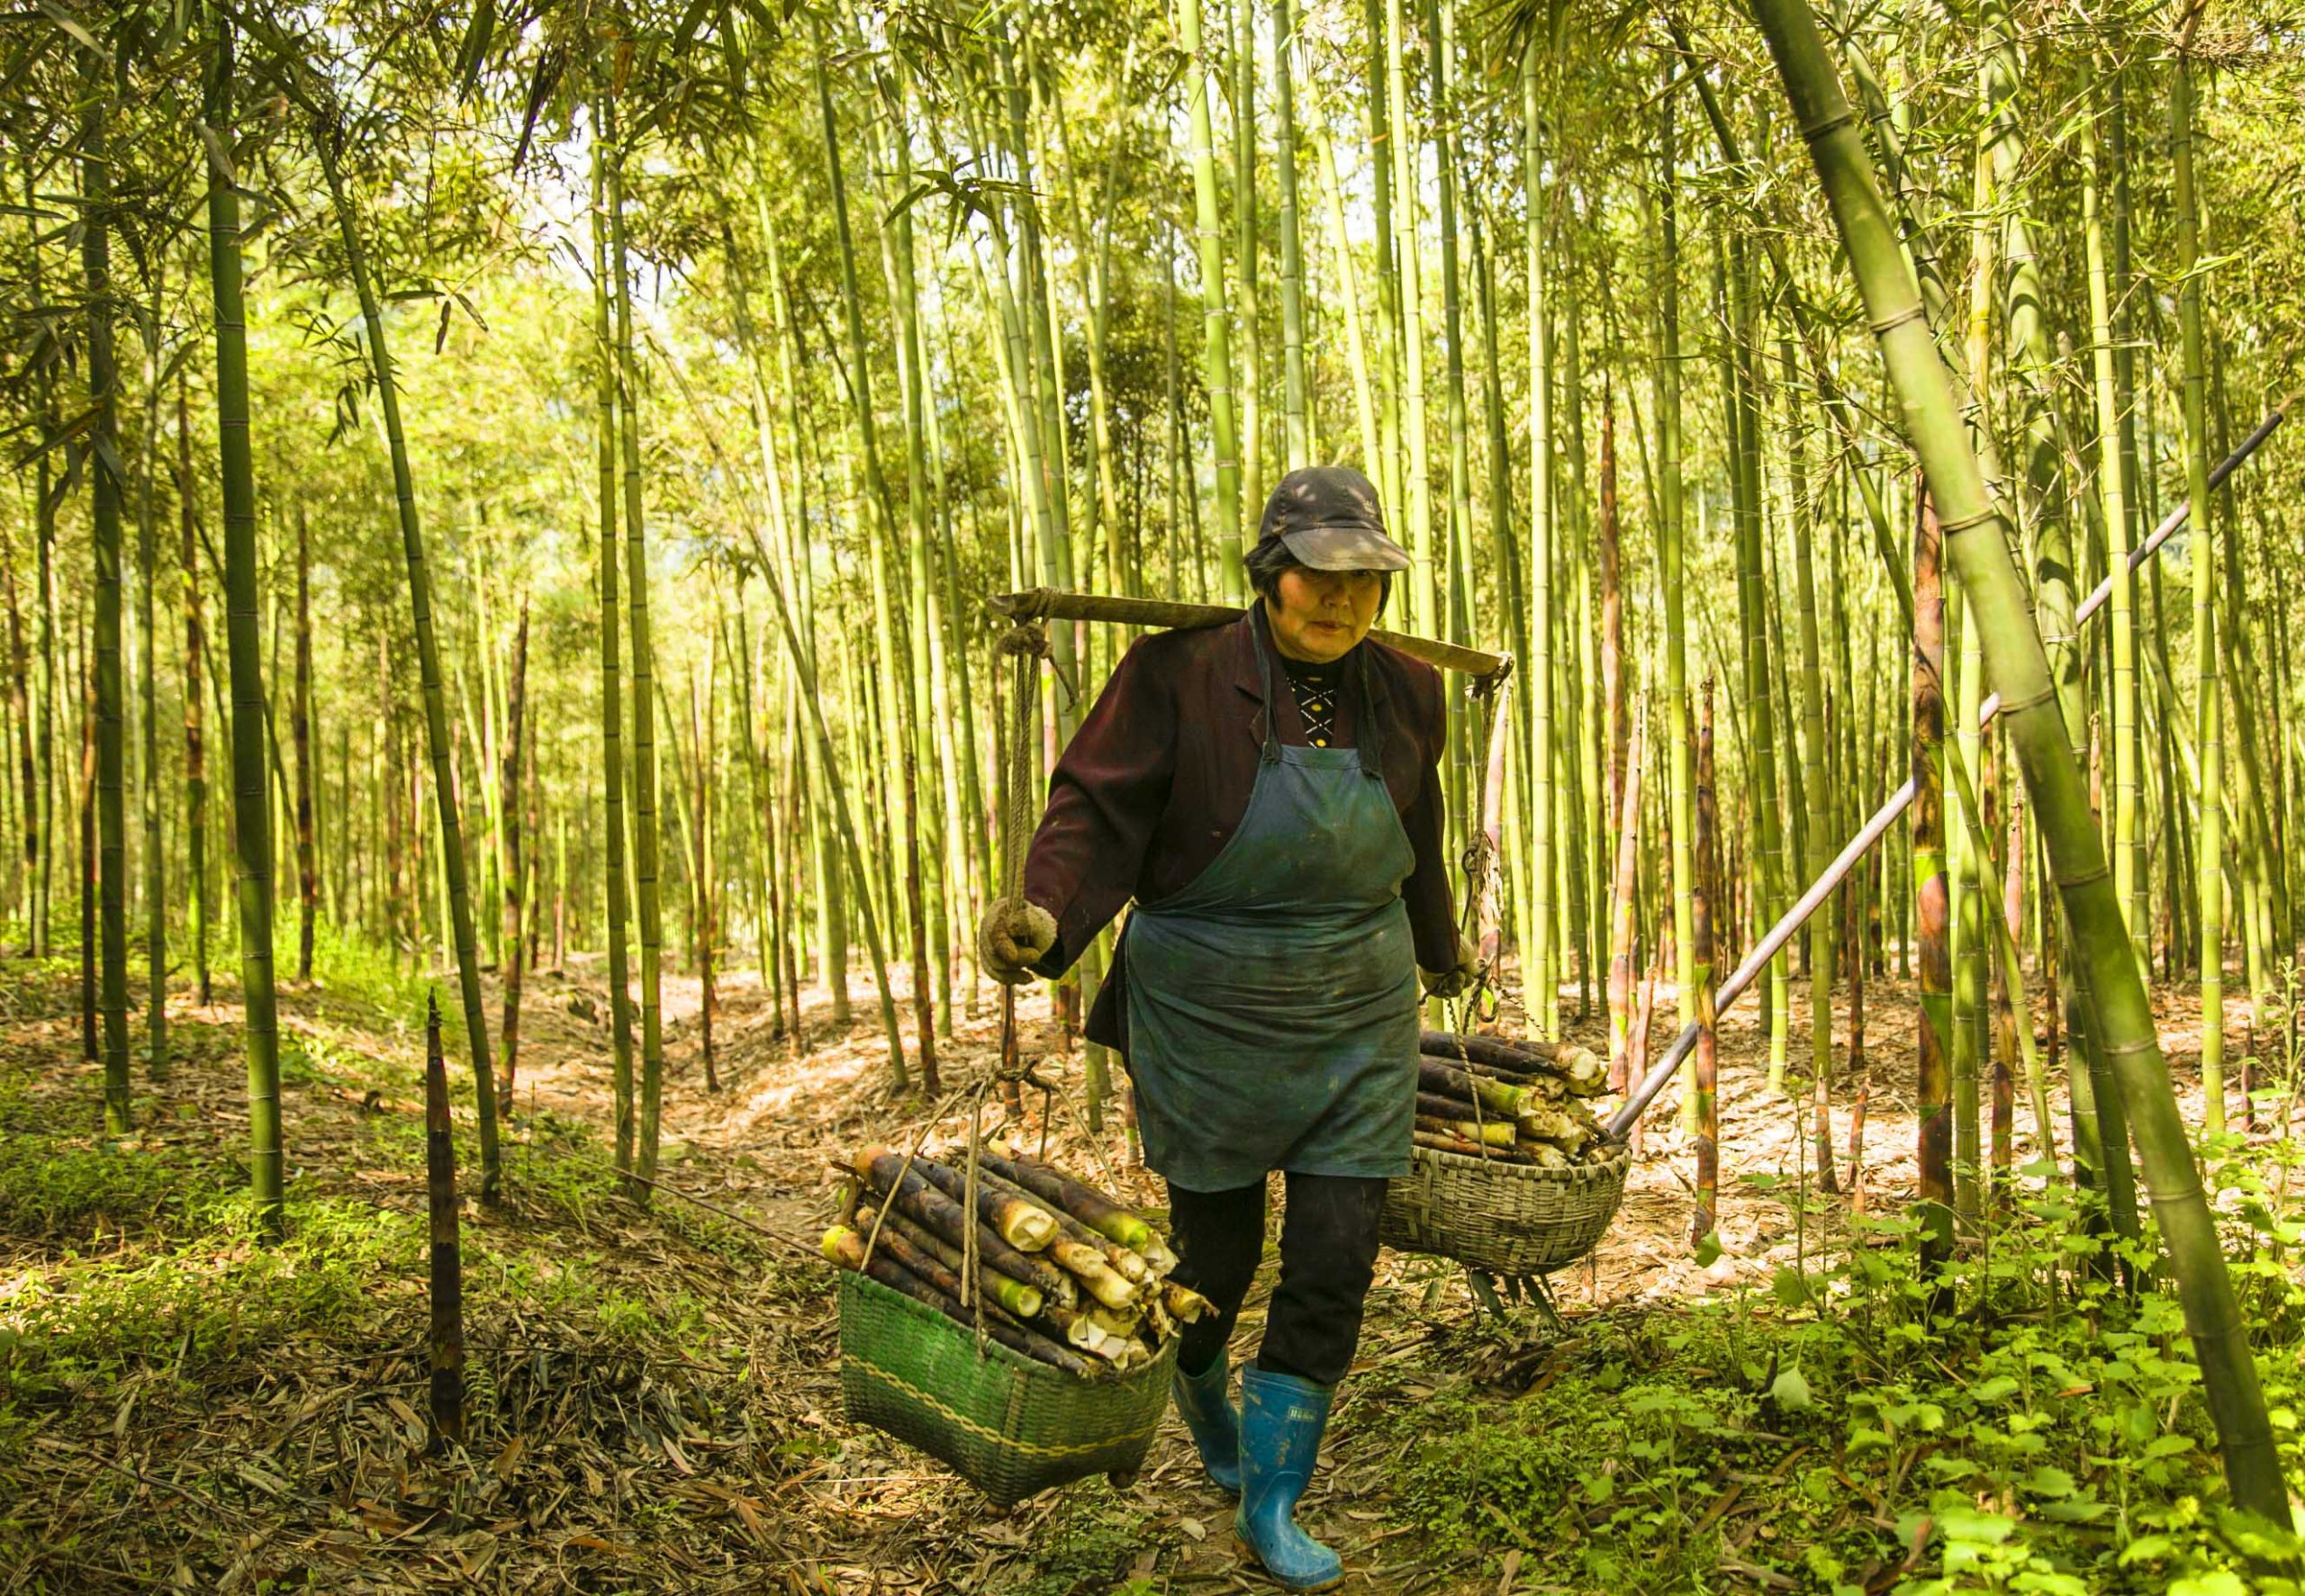 Photo of Chinese woman carrying a basket on bamboo shoots